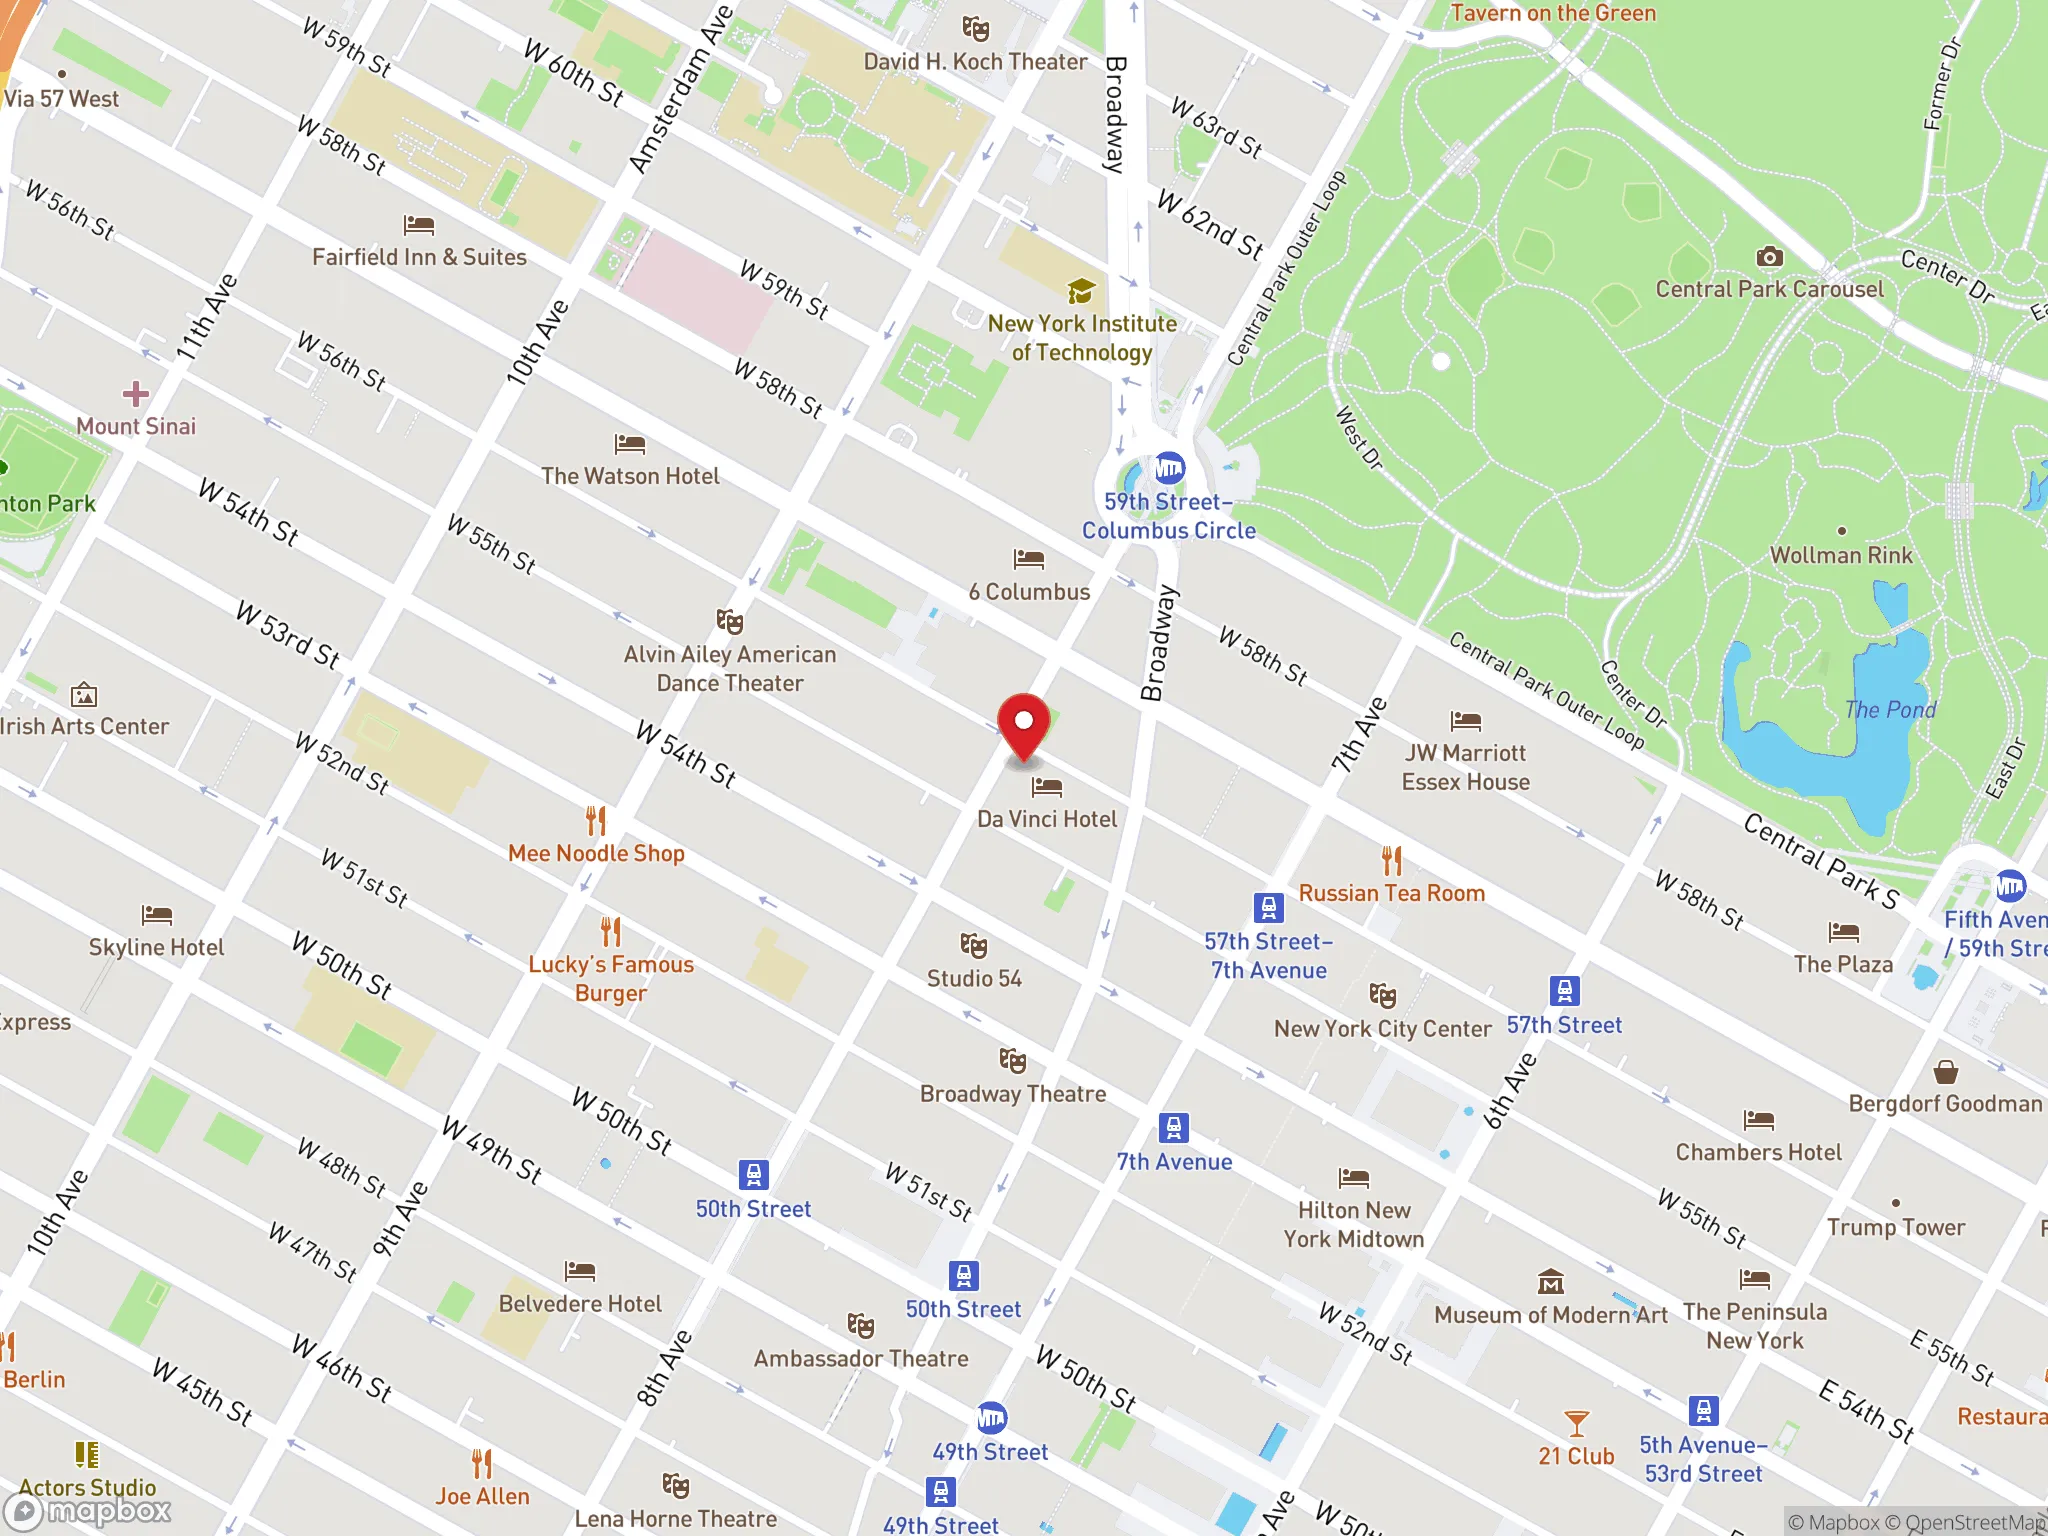 Map showing the location of a Dave's Hot Chicken restaurant on 8th Avenue in New York City.